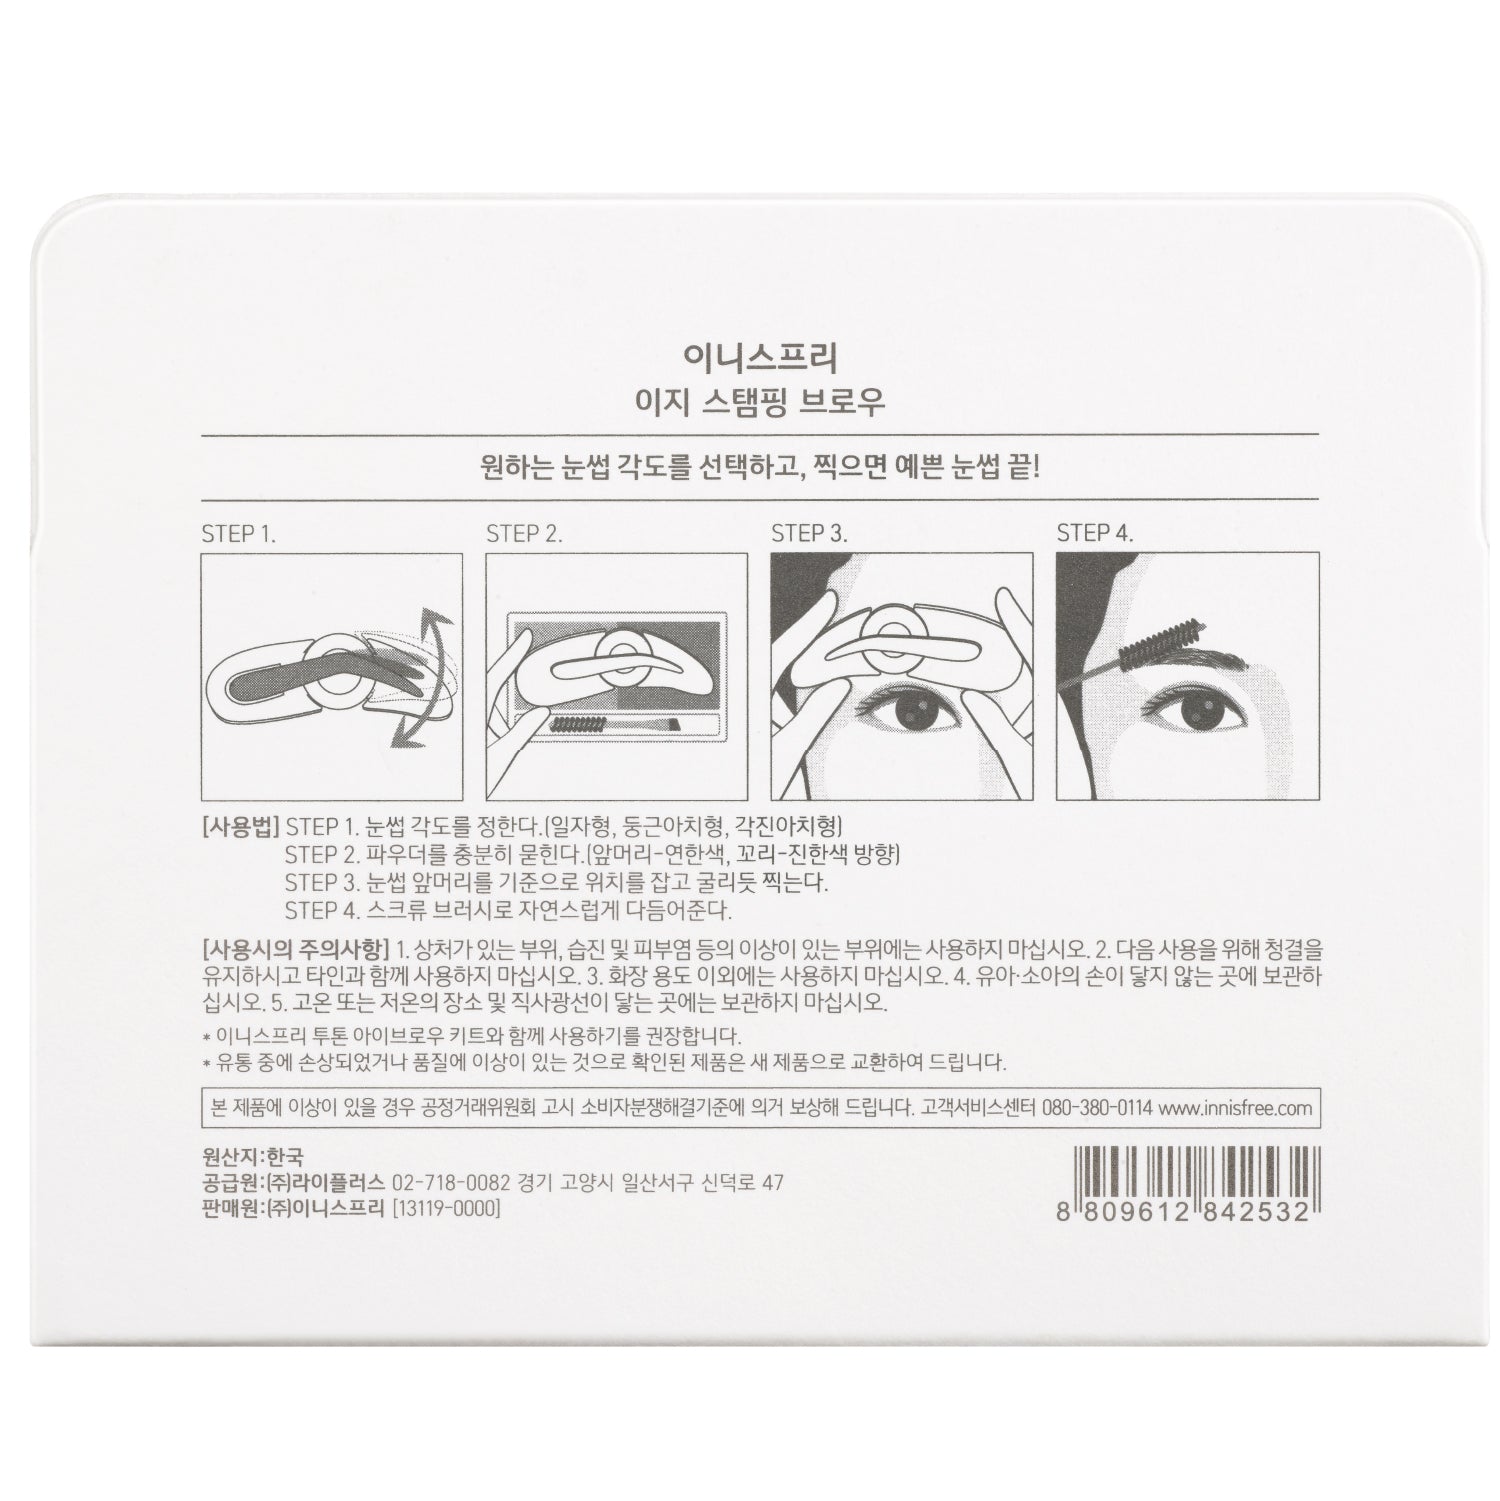 Easy Stamping Brow 1EA